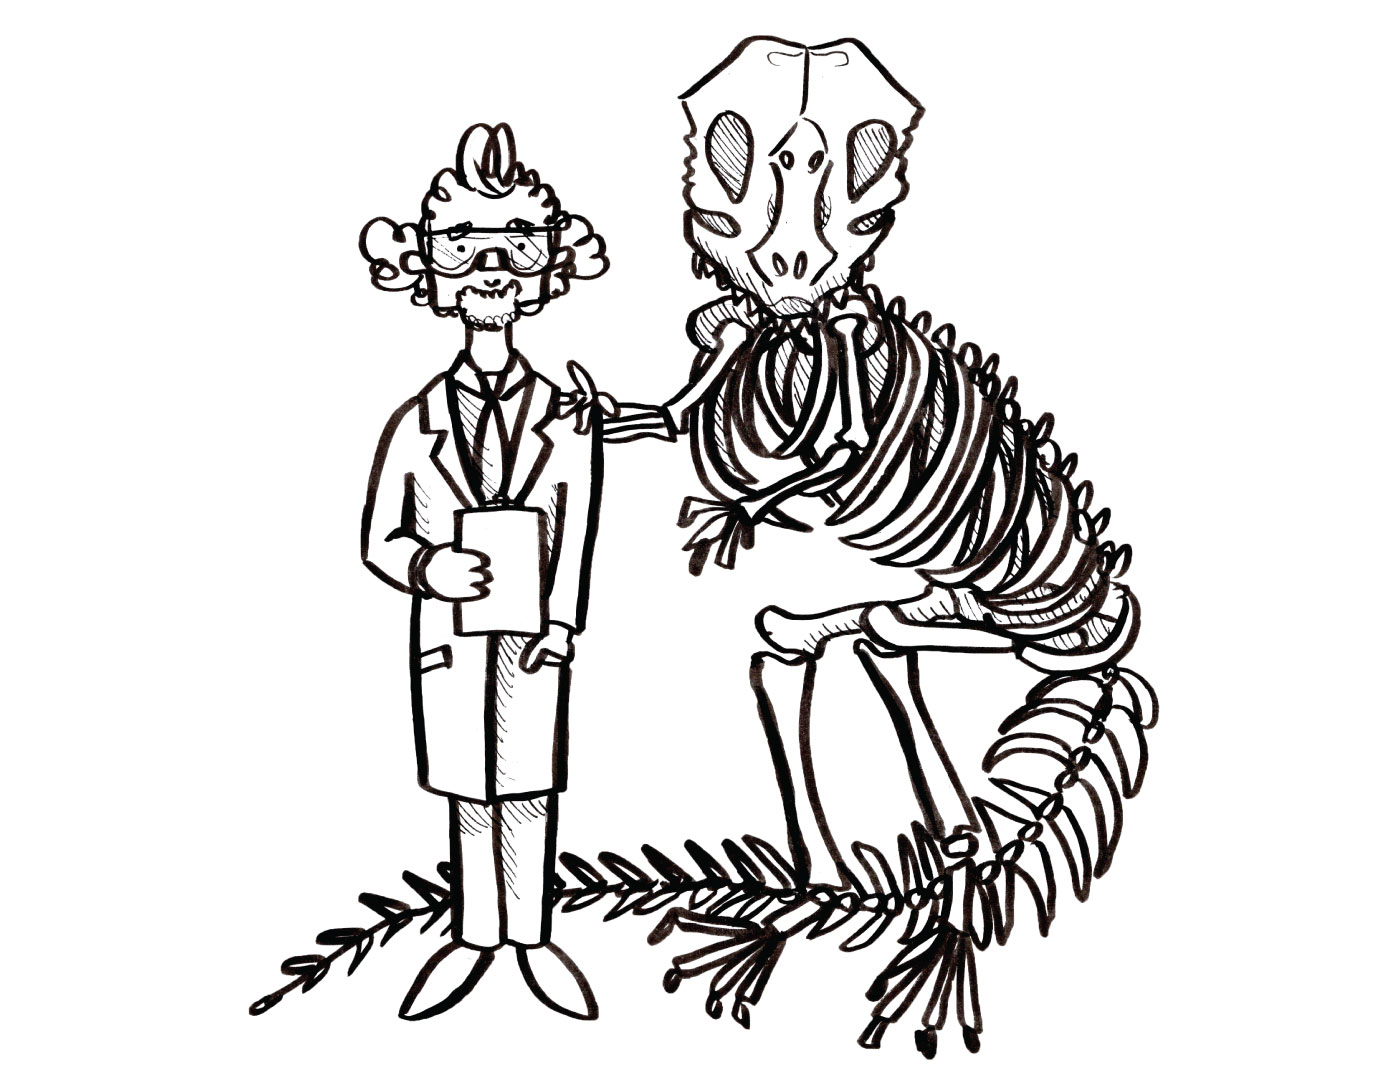 Scientist with dinosaur fossils coloring page